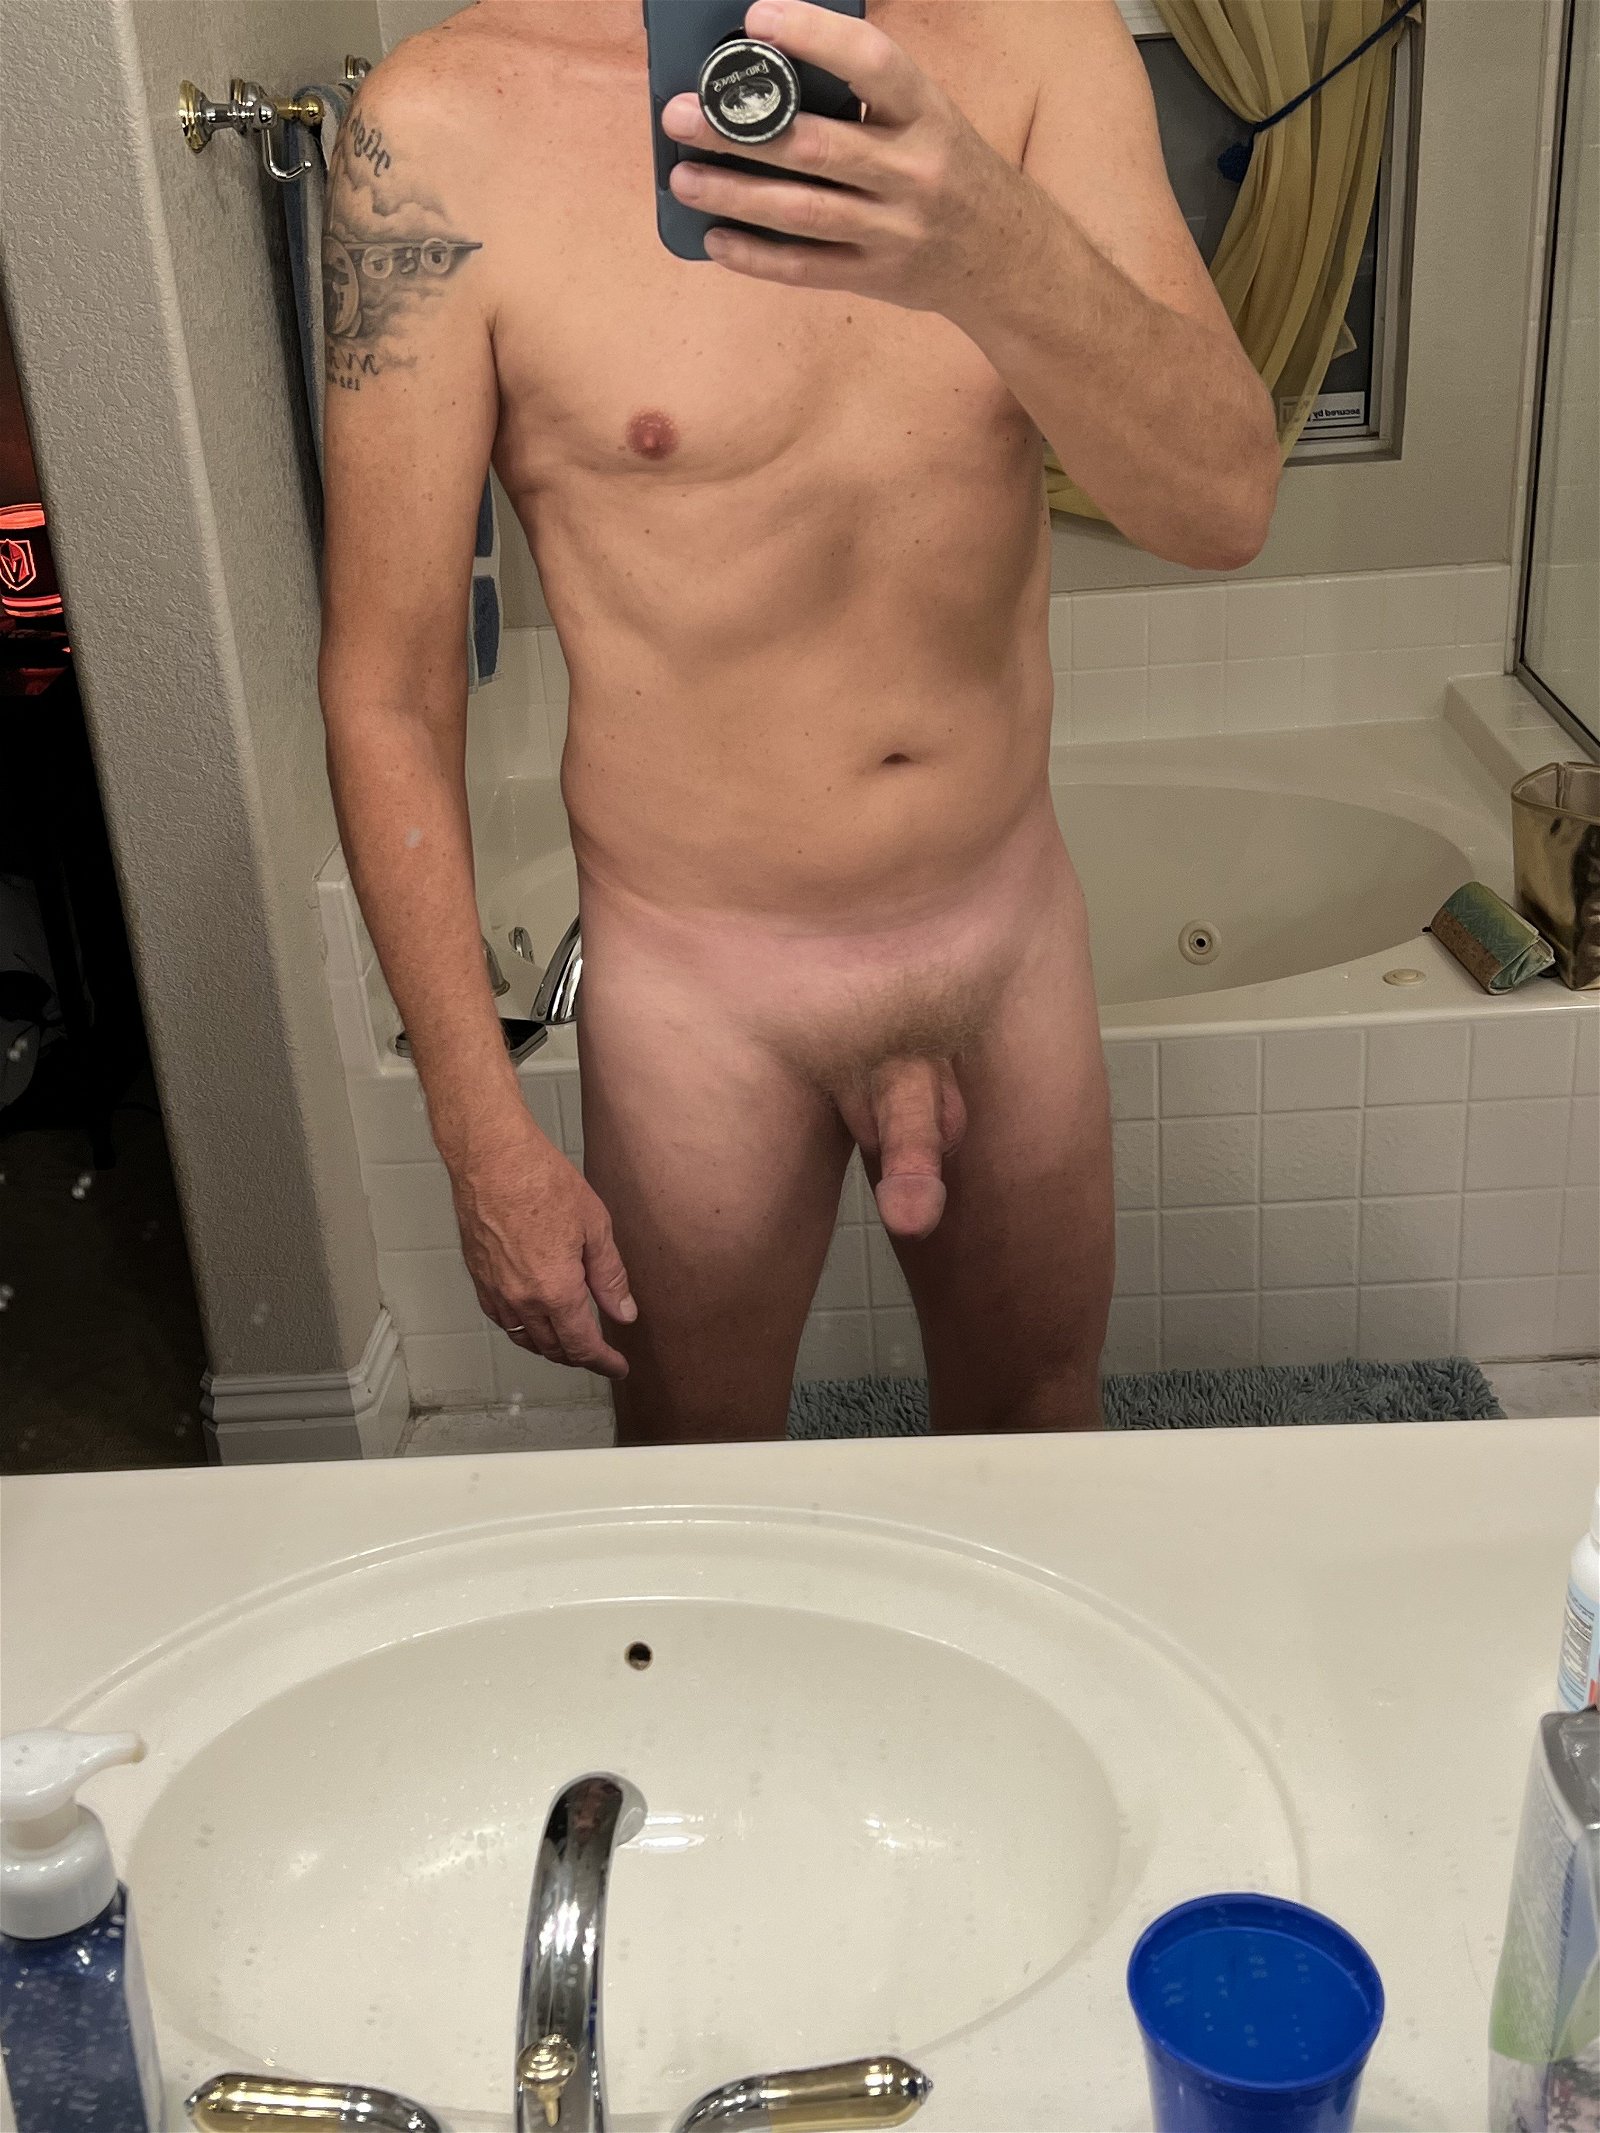 Photo by Desertguy with the username @Desertguy, who is a verified user,  October 16, 2023 at 1:45 PM. The post is about the topic MEN Over 50 and the text says 'I'm not a big muscle guy, I know I don't have a big dick. But, I think I look pretty good for 59. I started doing a little exercise and eating better about a year ago this month. I've lost about 30 pounds, mostly around my middle. I'm still working on a..'